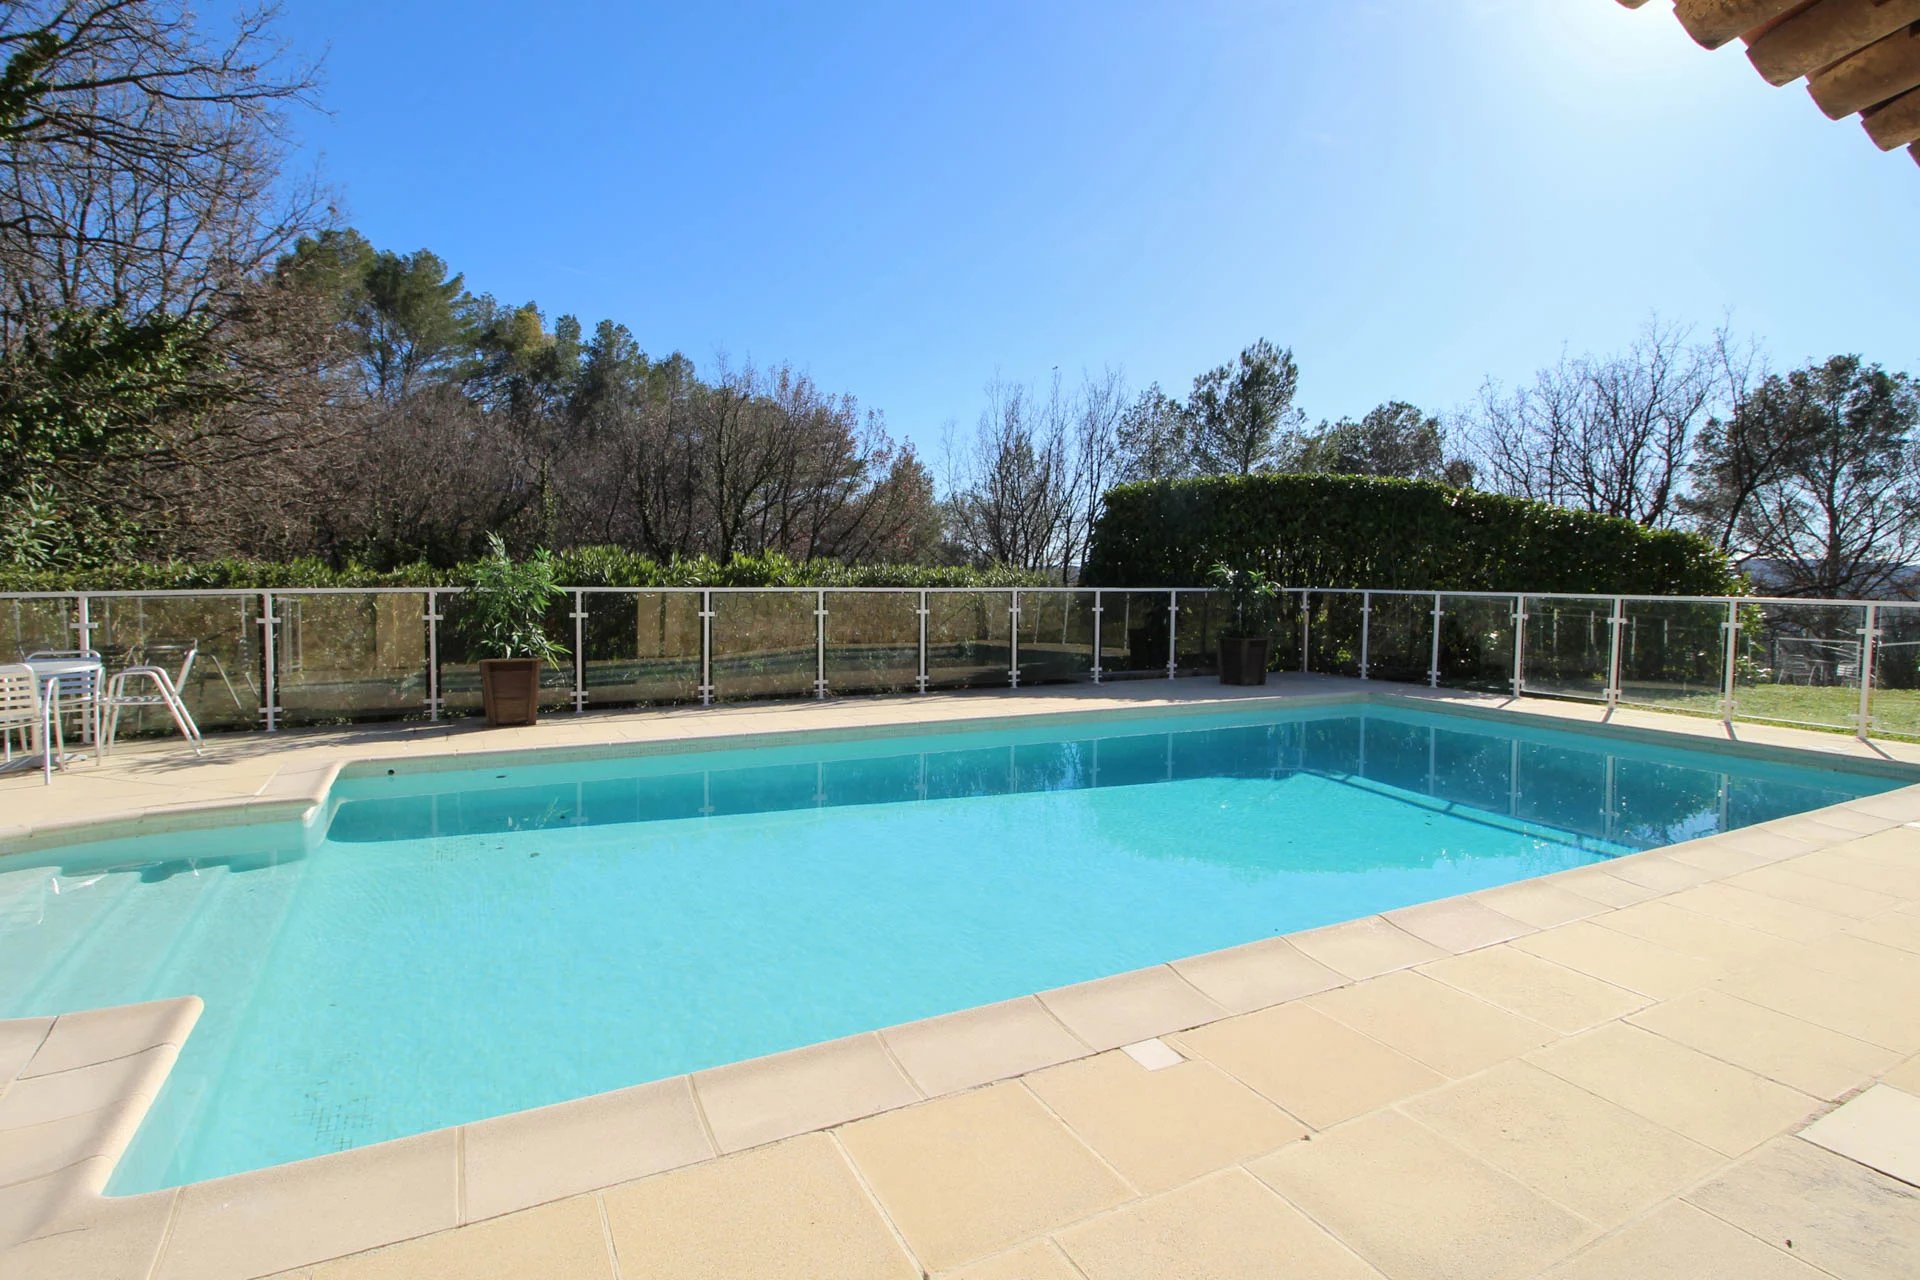 Villa with pool within walking distance of the village - Montauroux